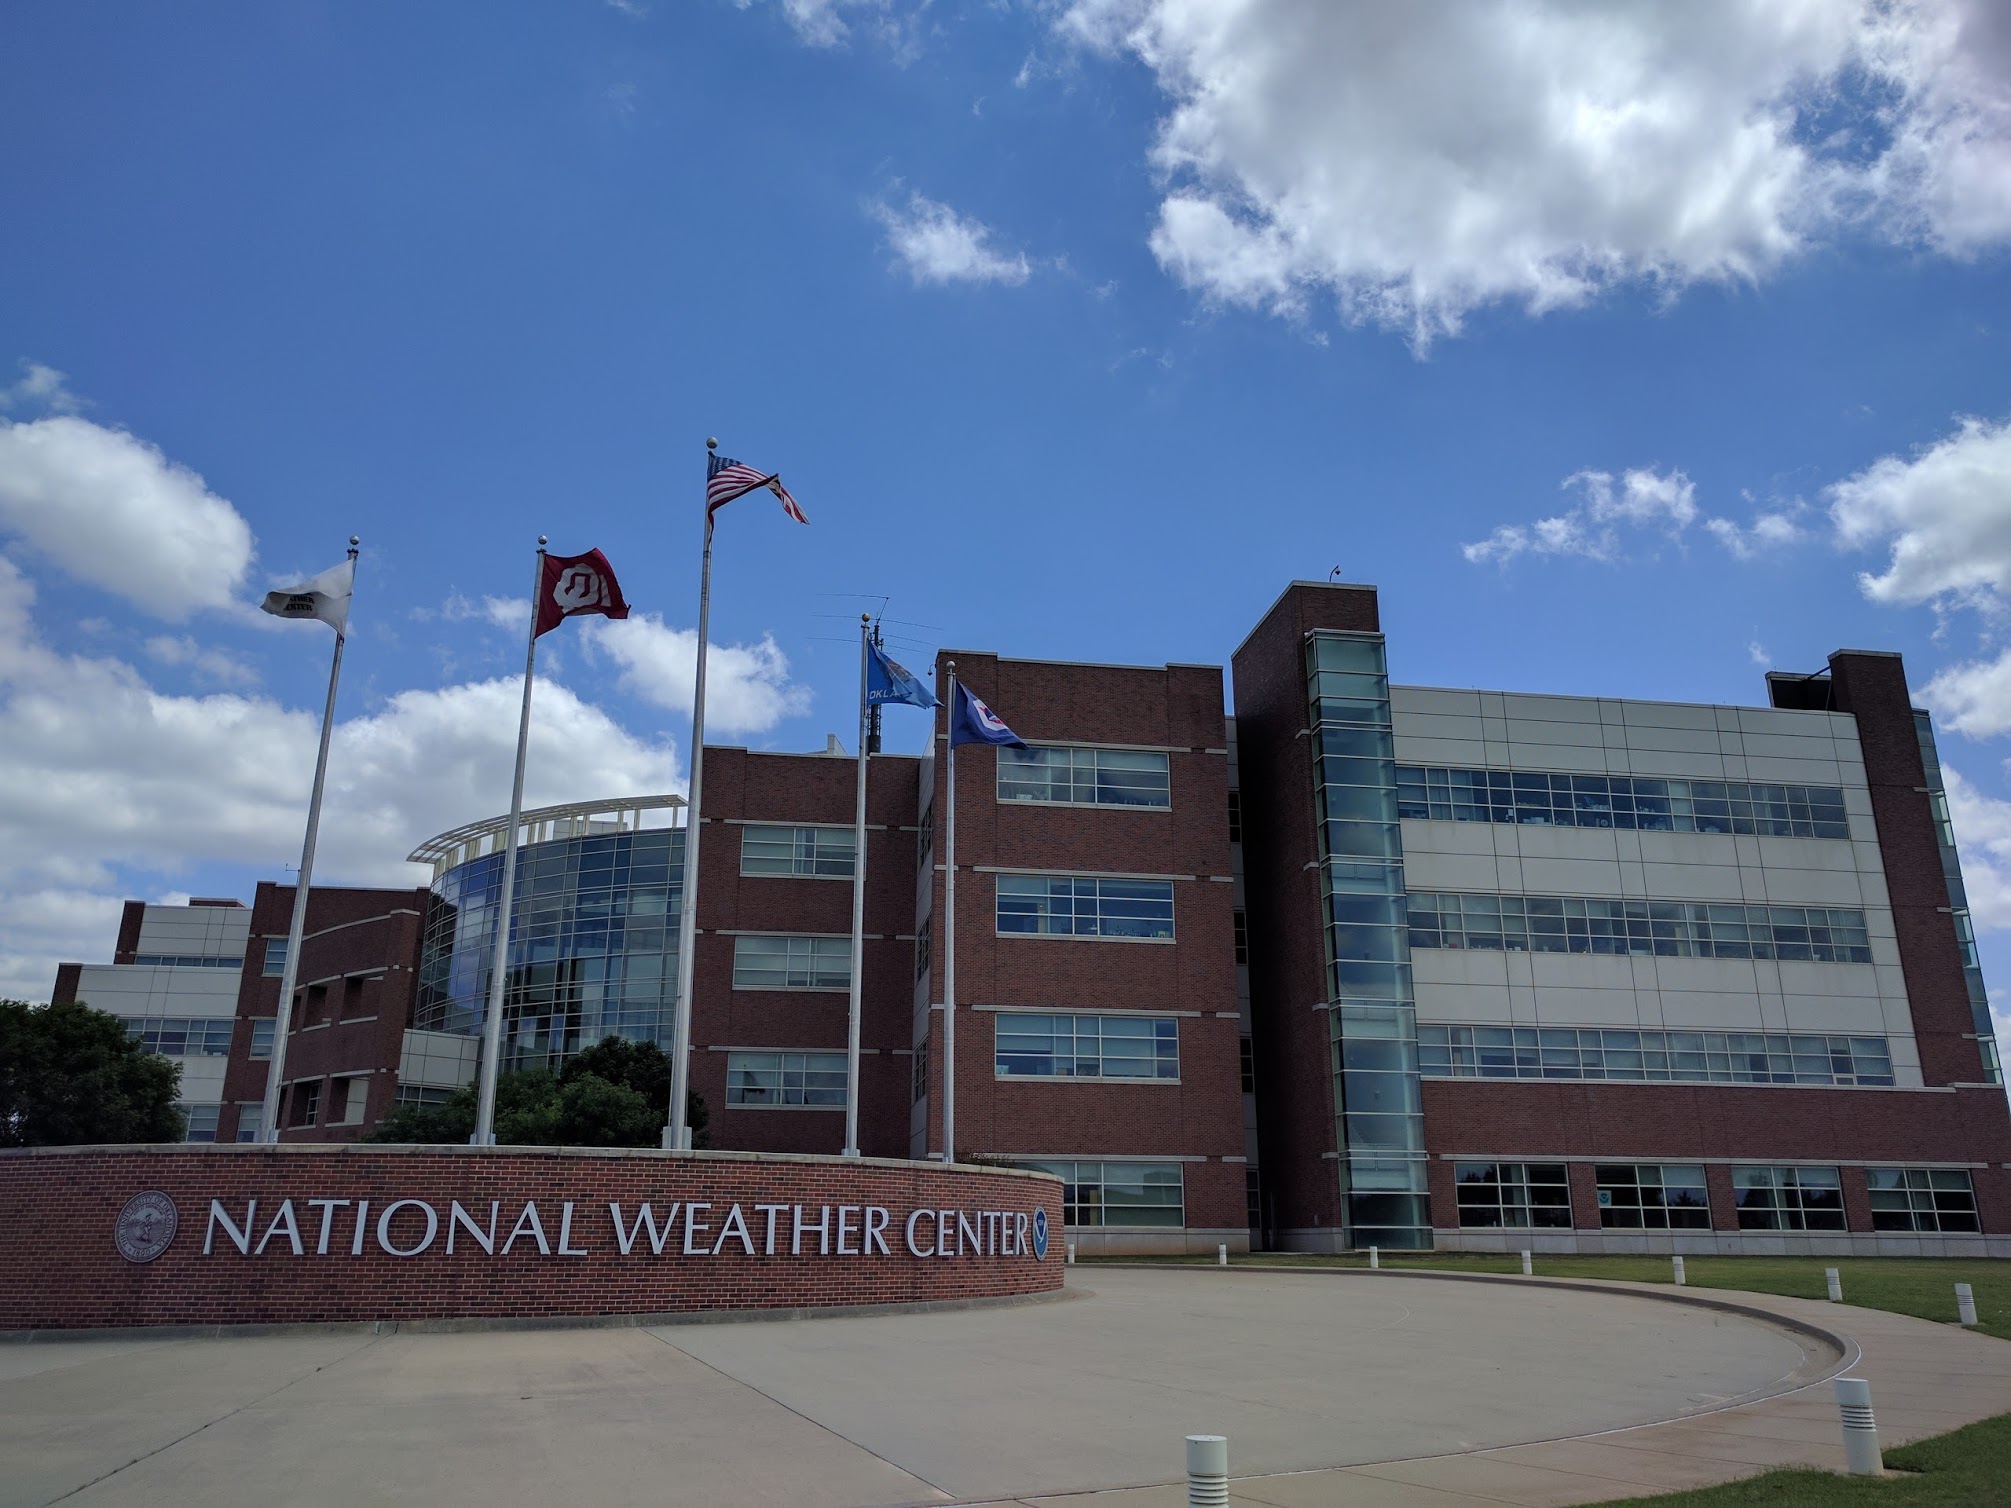 National Weather Center front and flags